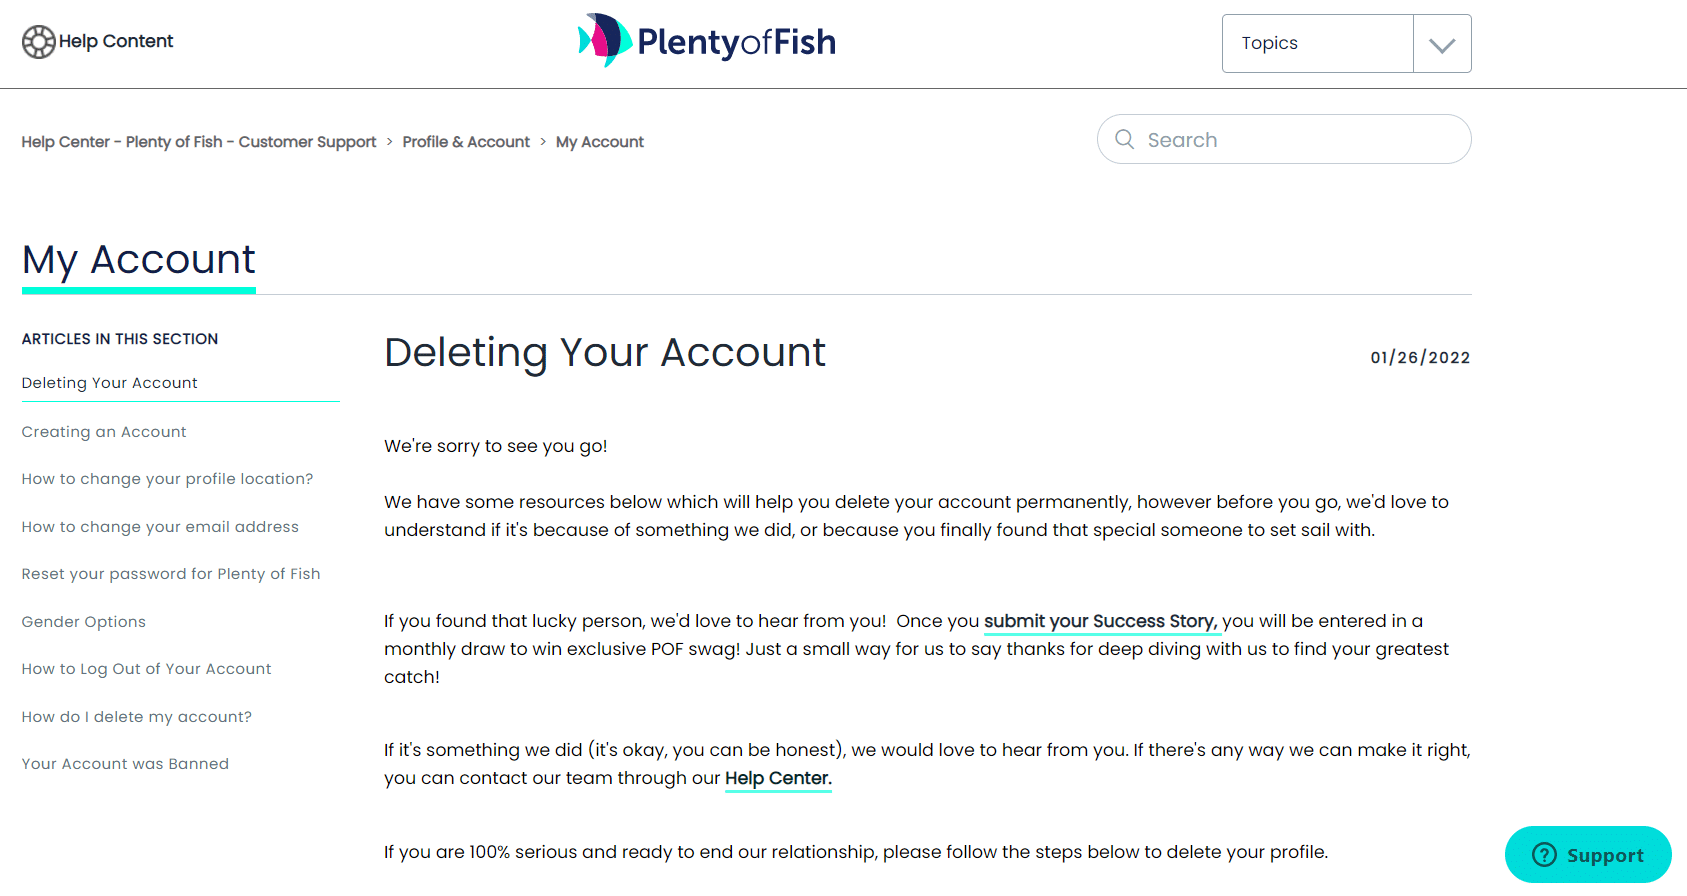 delete account page in plenty of Fish help center